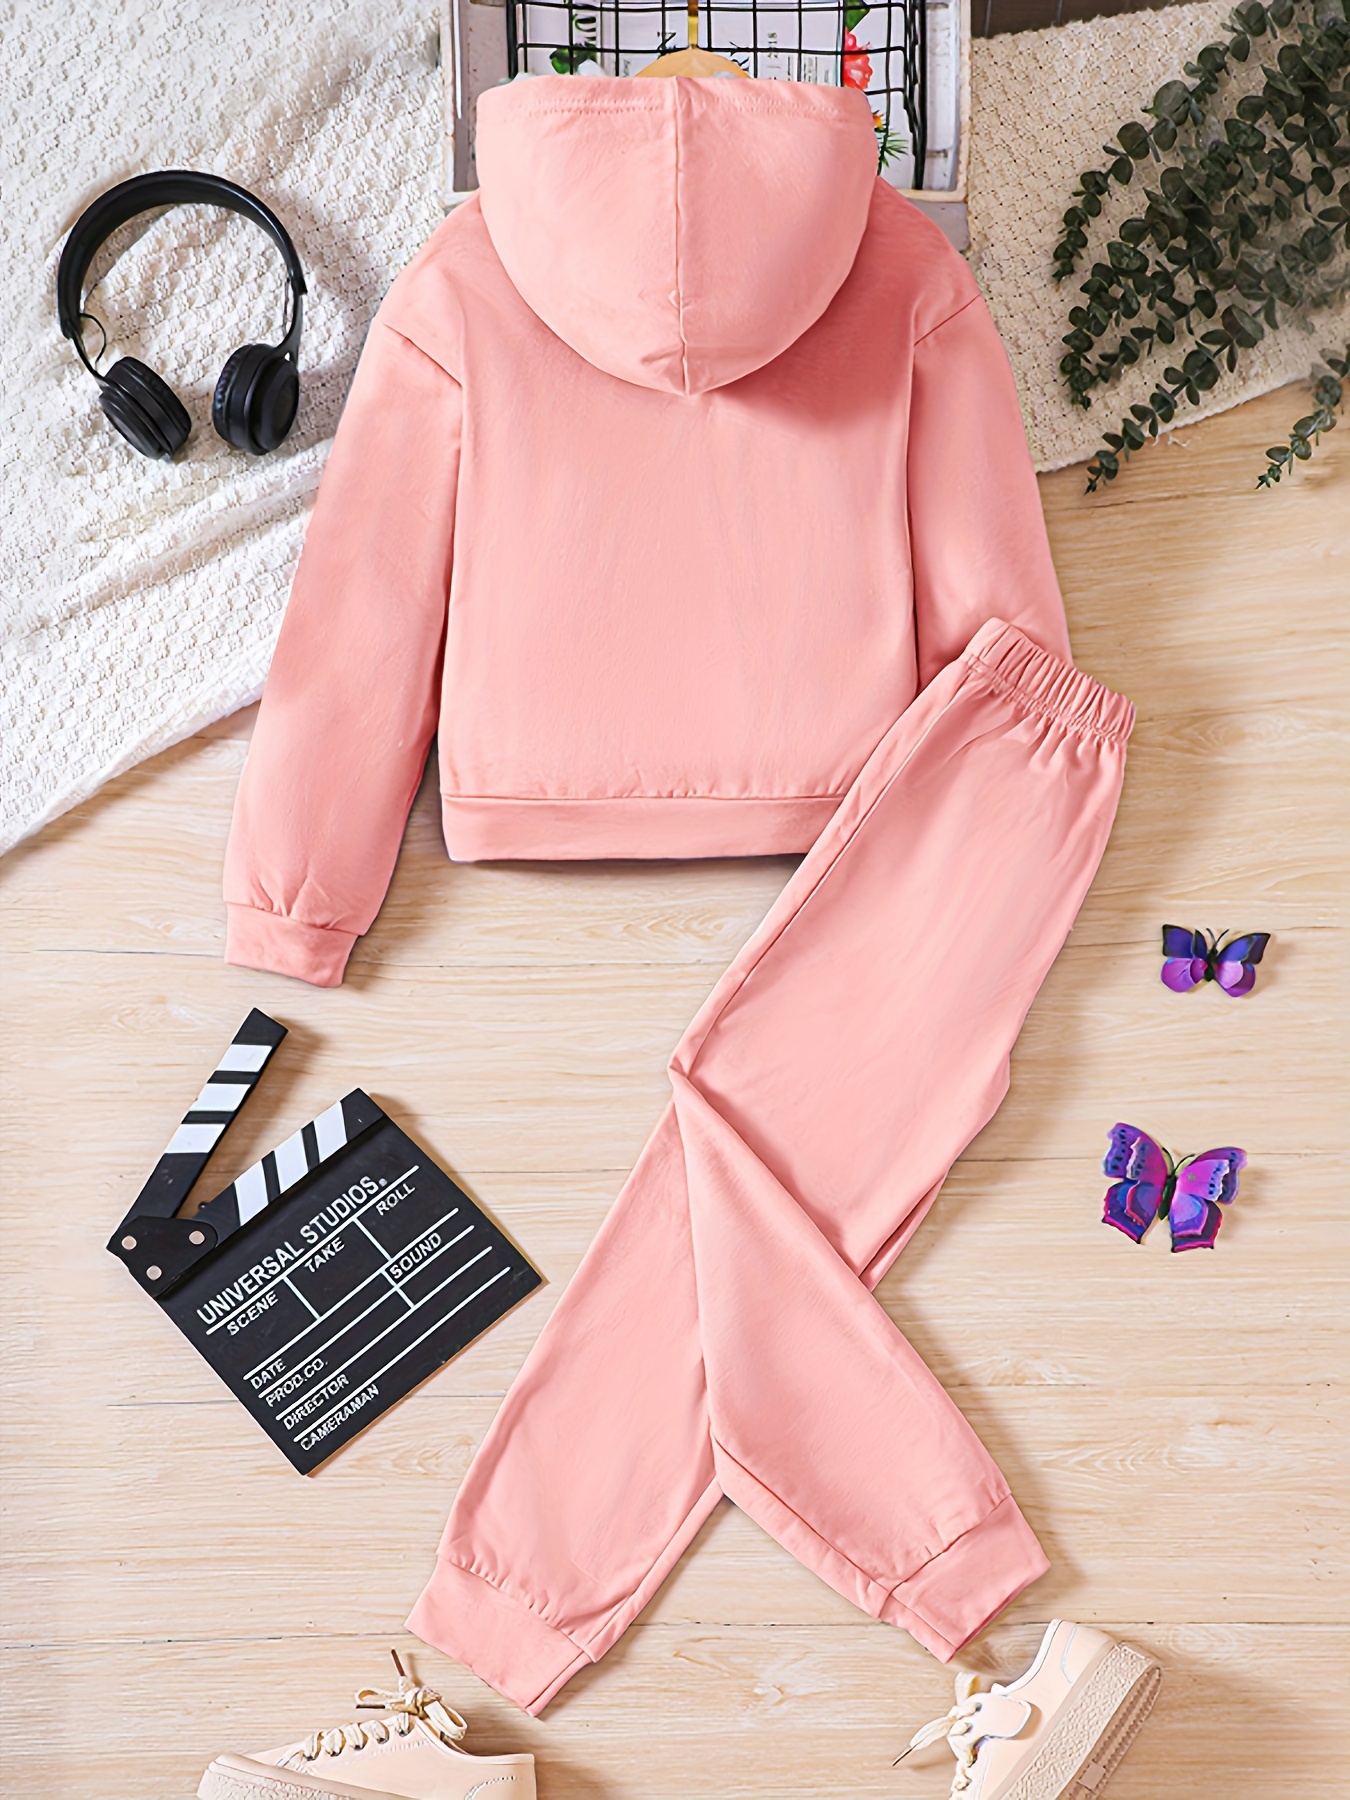 Girl's Butterfly Print 2pcs, Hoodie & Sweatpants Set, Color Clash Casual  Outfits, Kids Clothes For Spring Fall